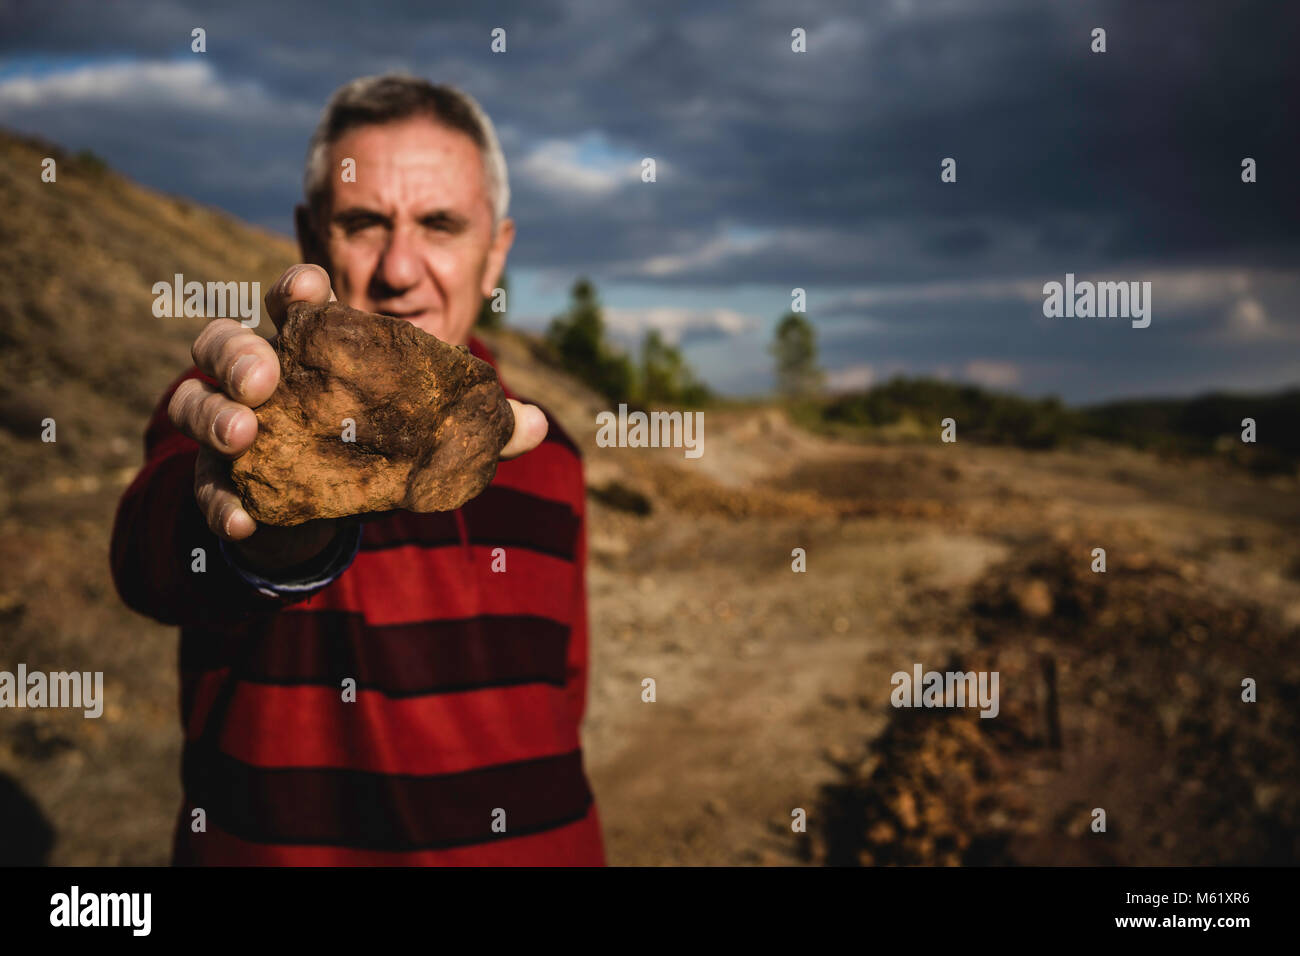 Elderly man showing mineral stone Stock Photo